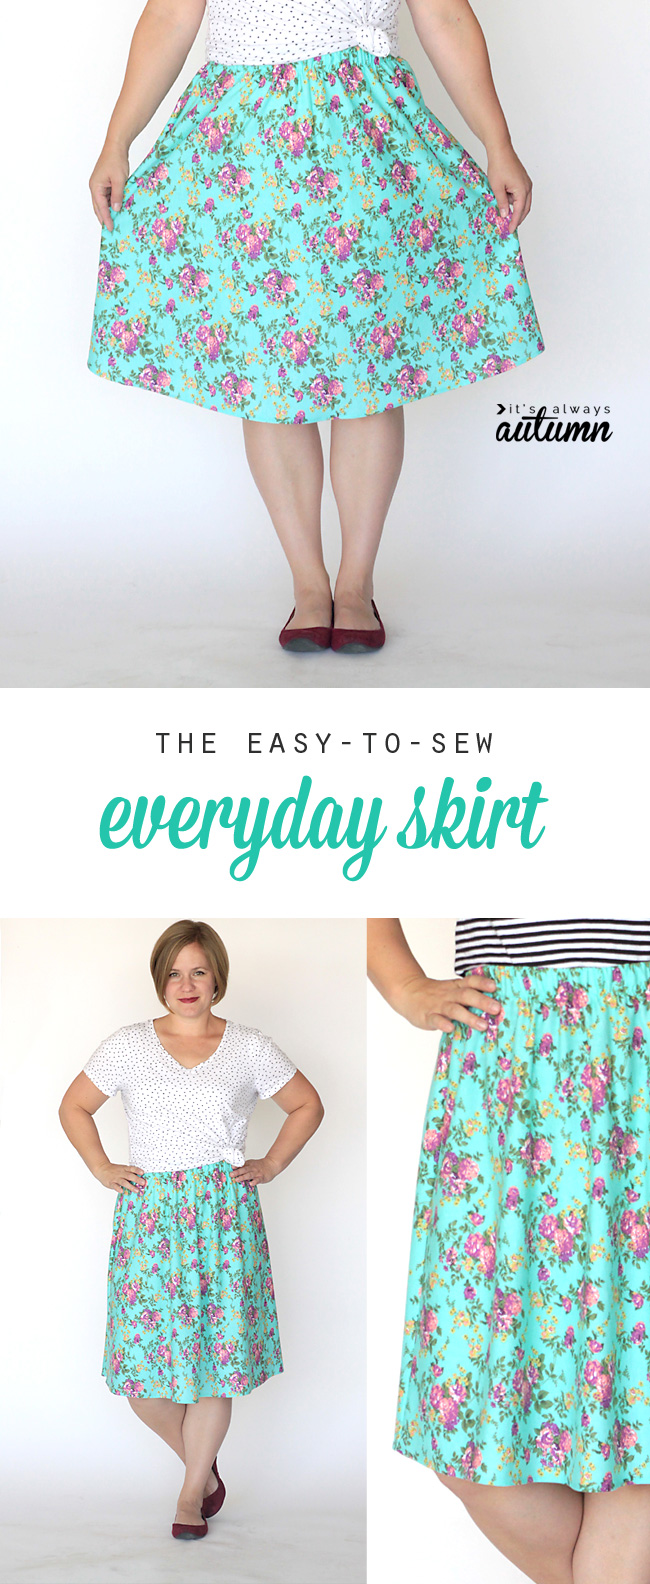 How to Add a Lining to a Skirt - Sew Daily